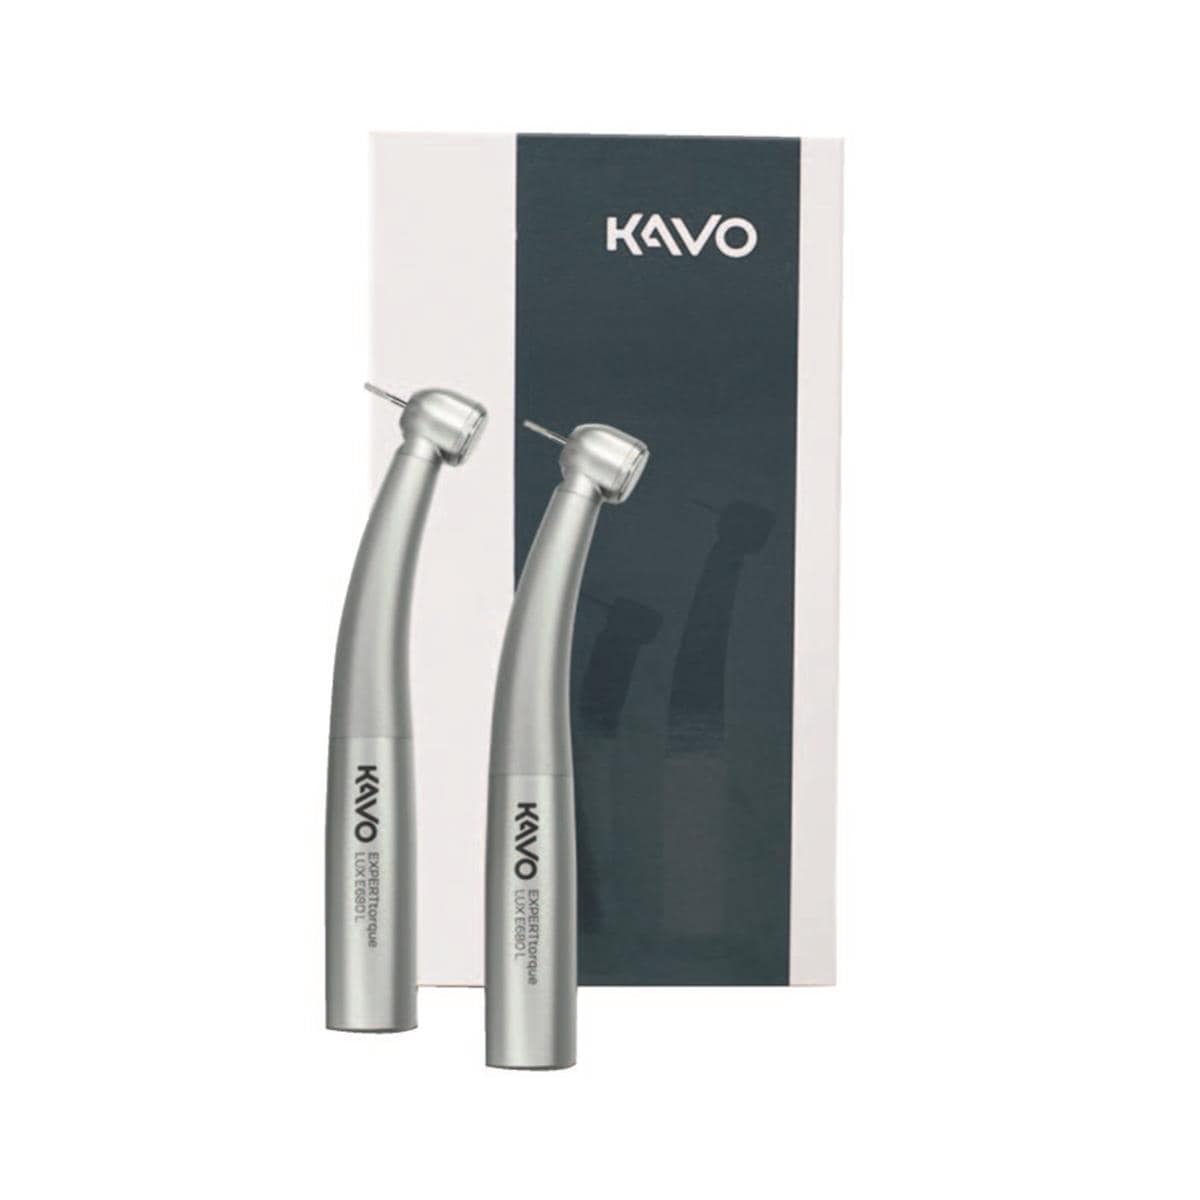 DUO-PACK E680L 10145478 KAVO